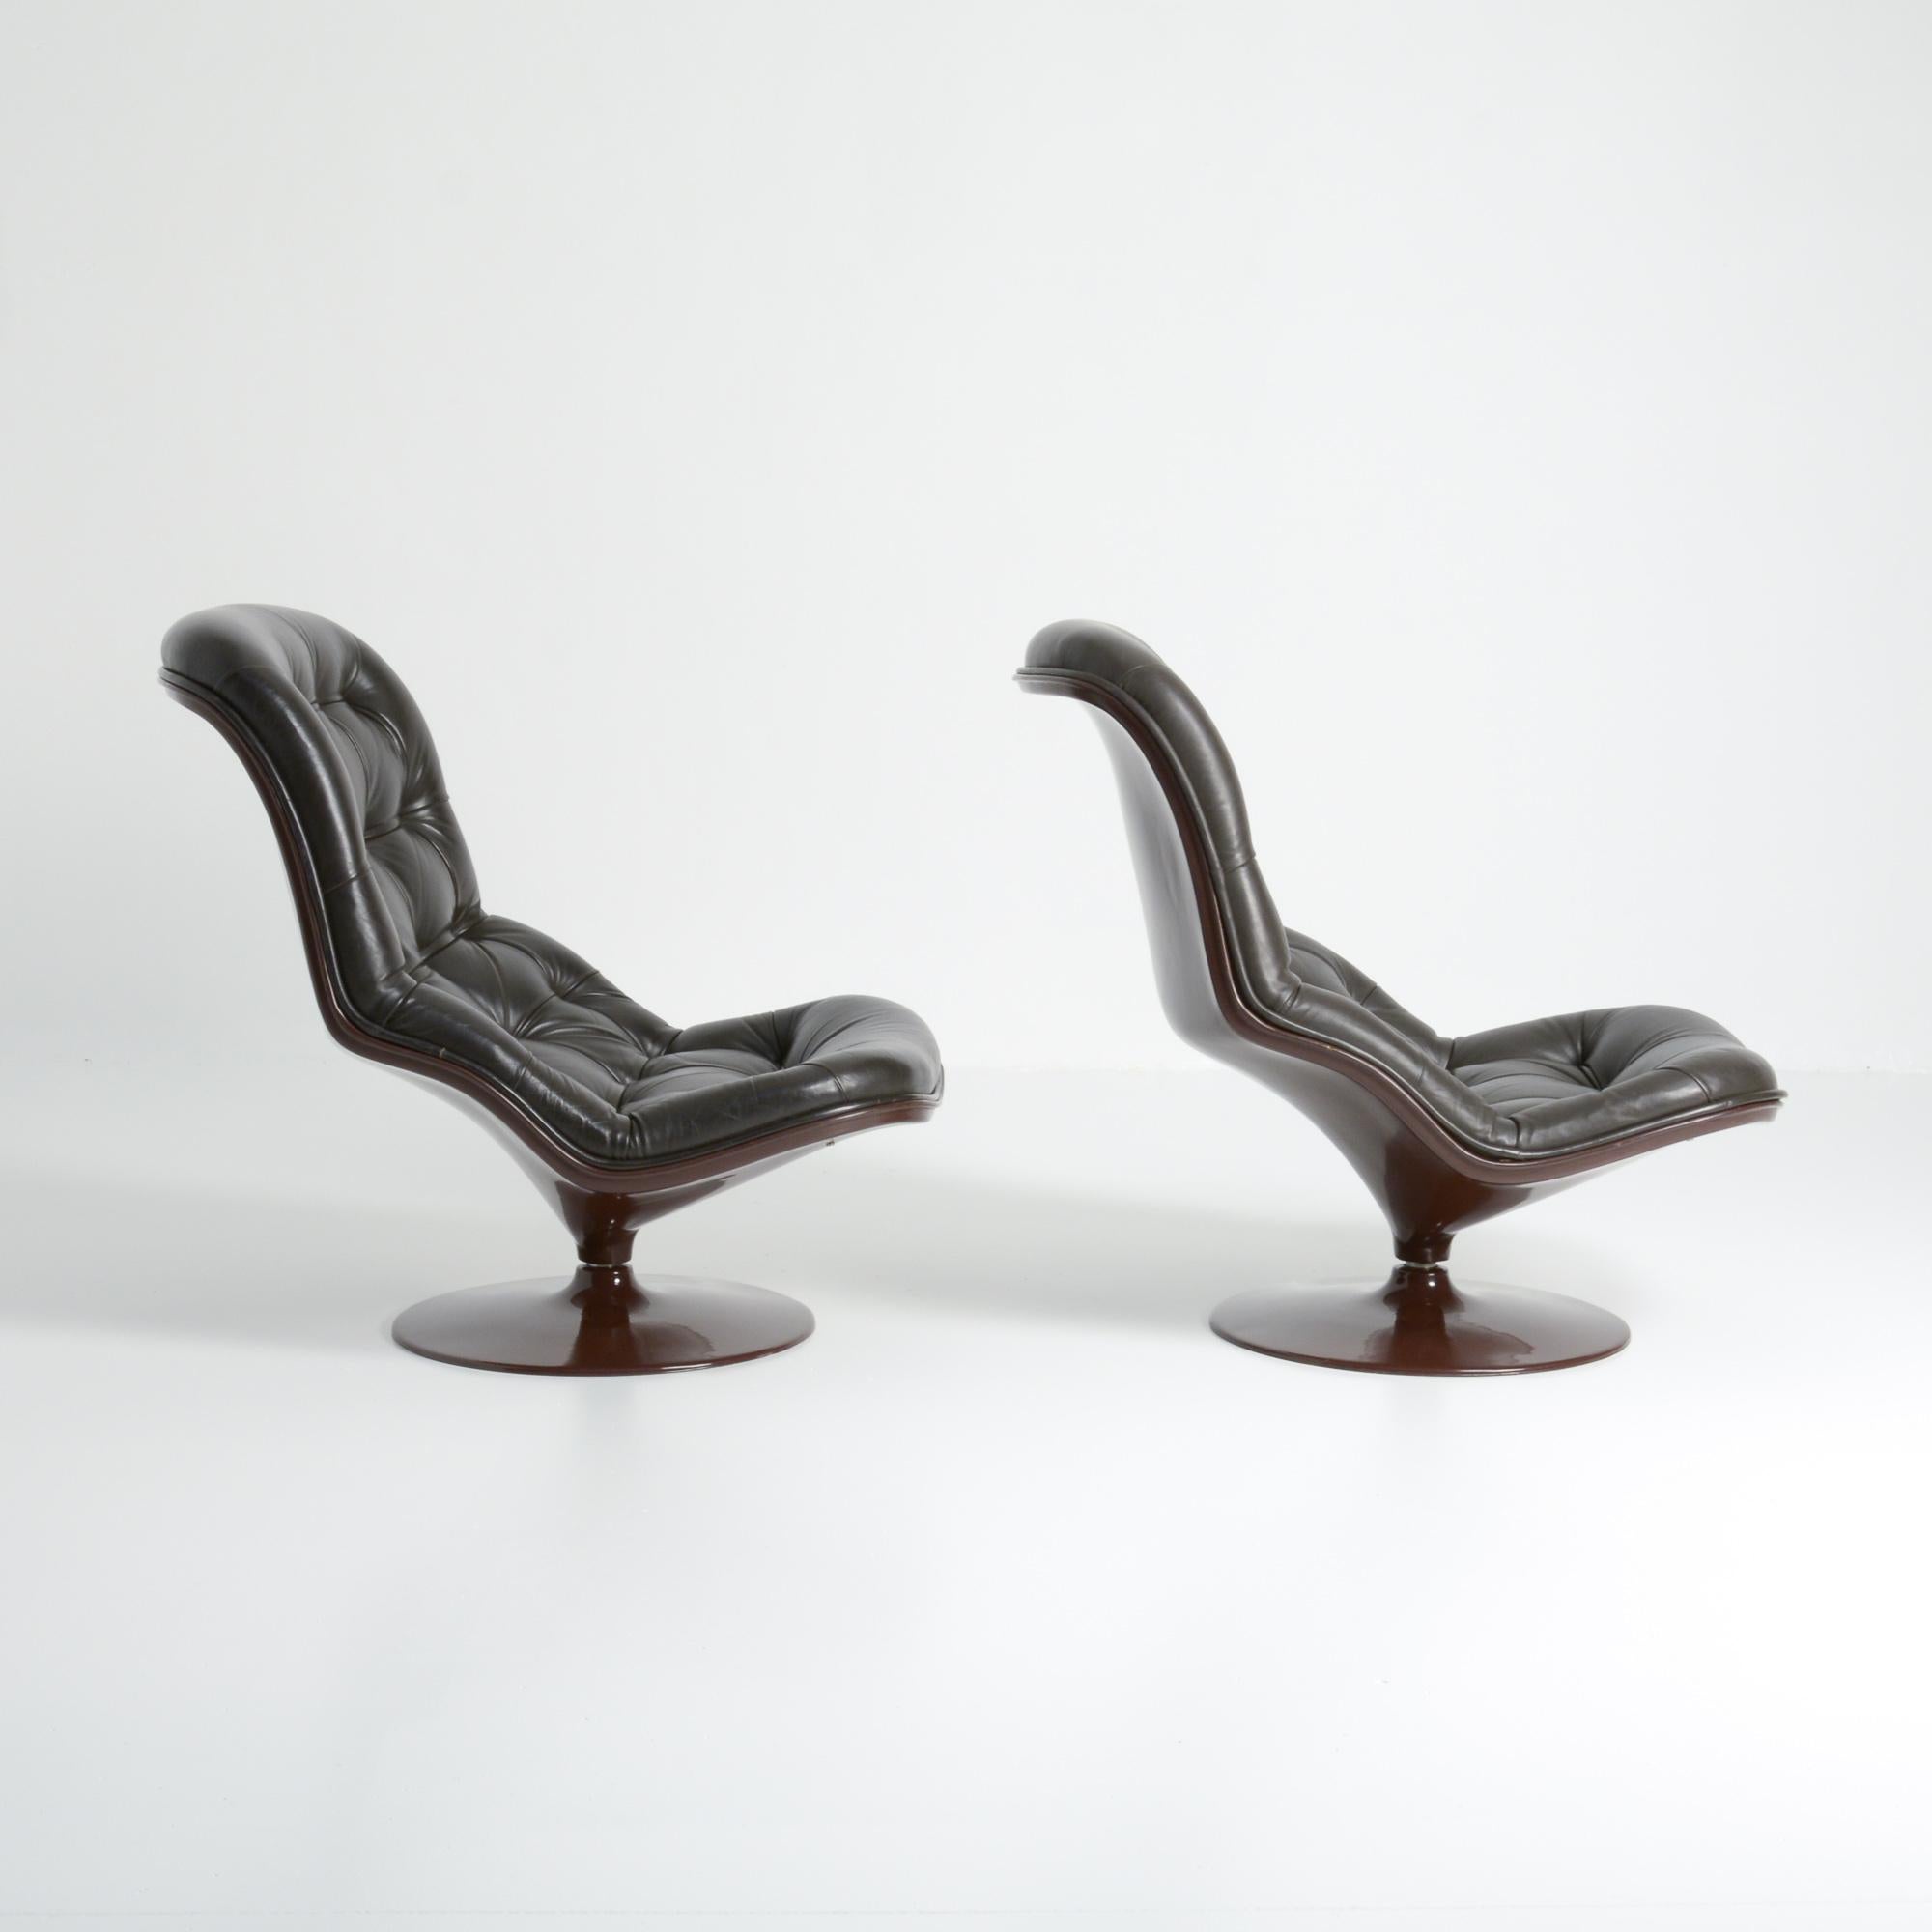 Belgian Pair of Shelby Lounge Chairs with Ottoman by Georges Van Rijck for Beaufort